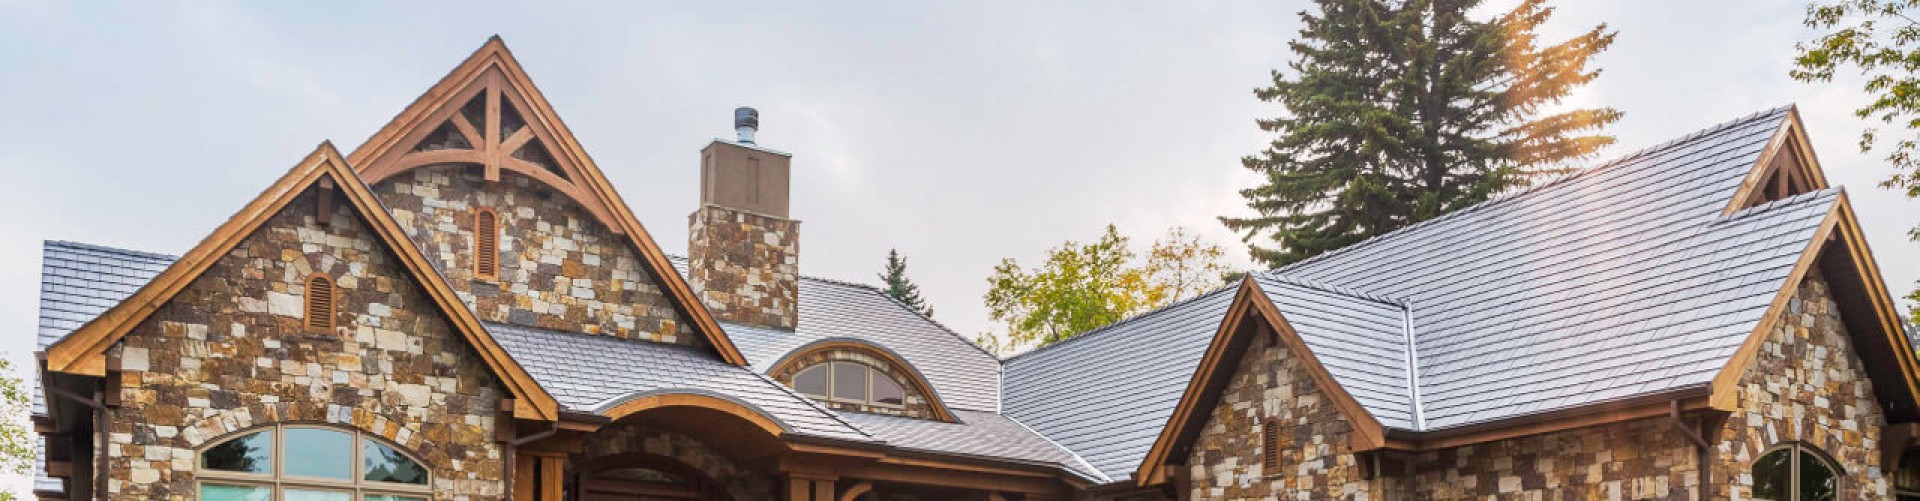 Best Roofing Company in Omaha - Handyman Services of Omaha